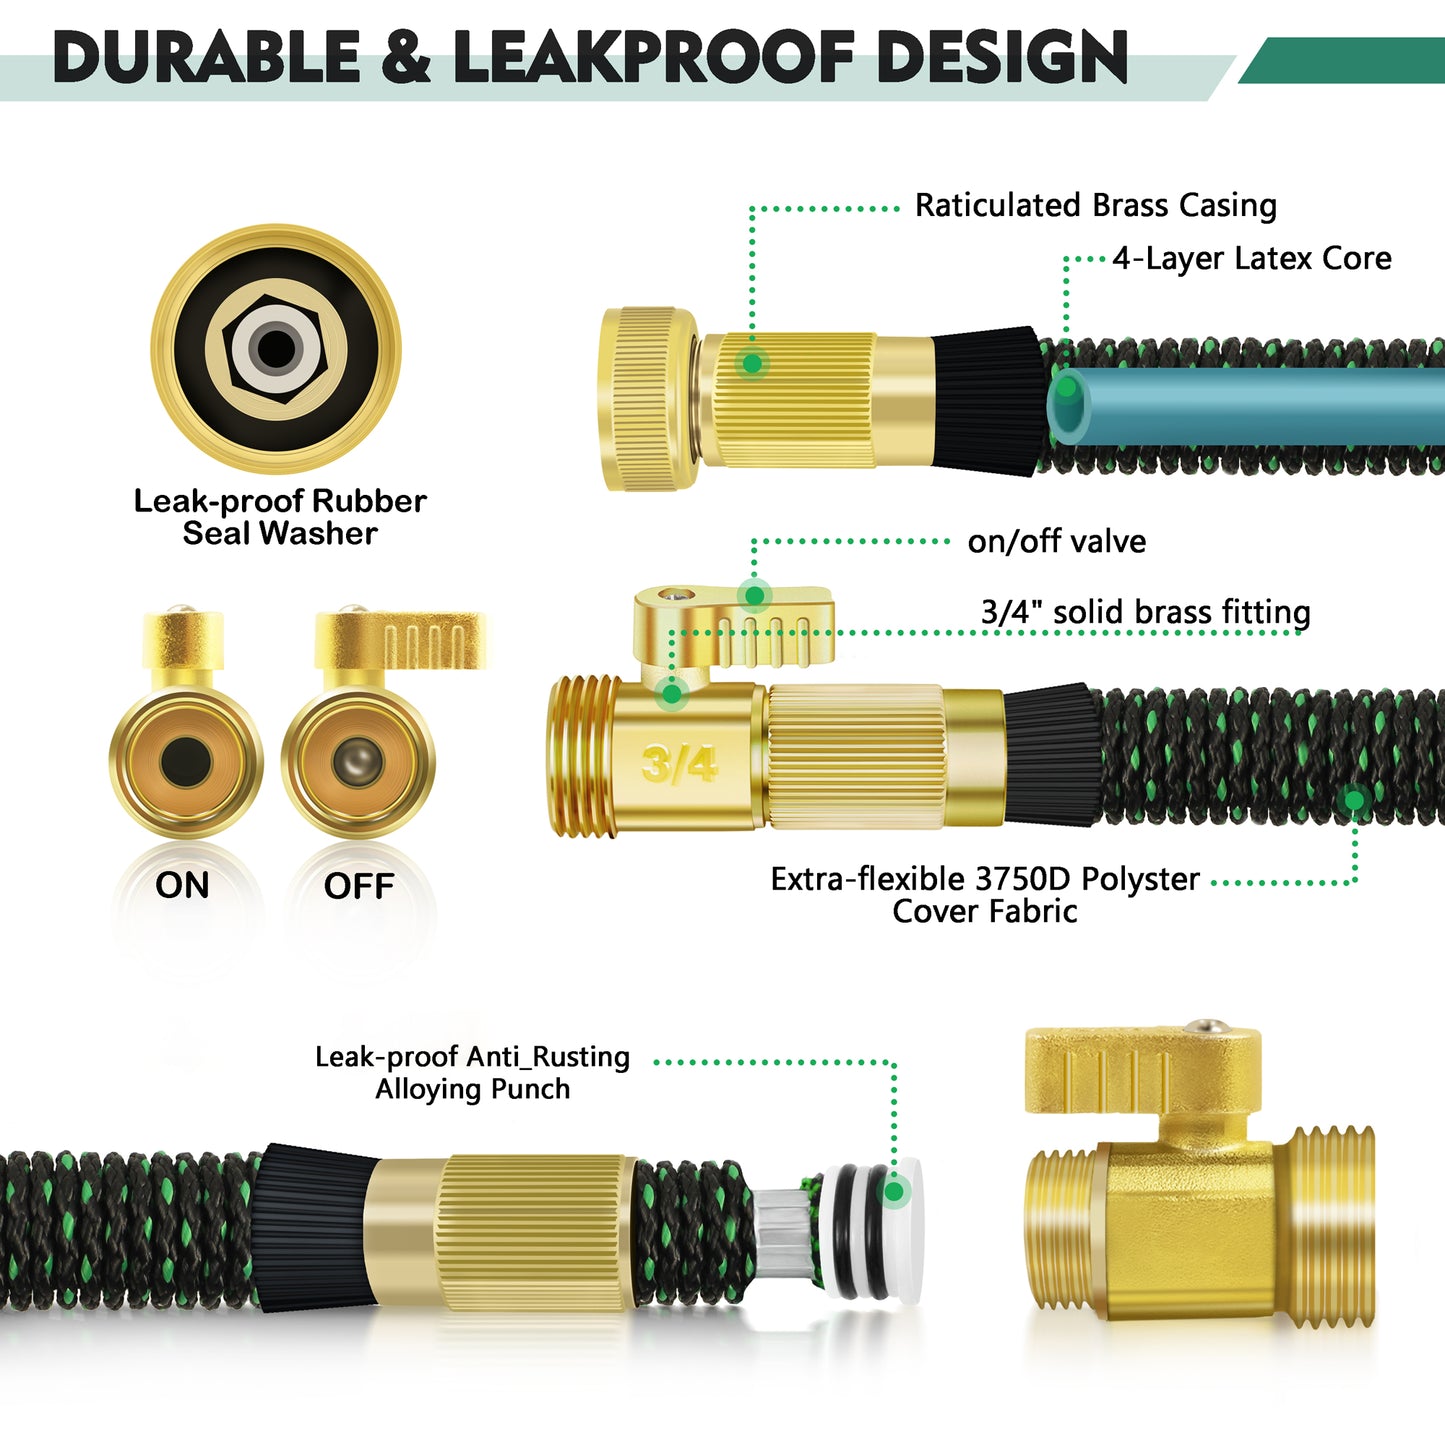 Expandable Garden Hose 100ft, Flexible Lightweight Water Hose with 10 Way Spray Nozzle